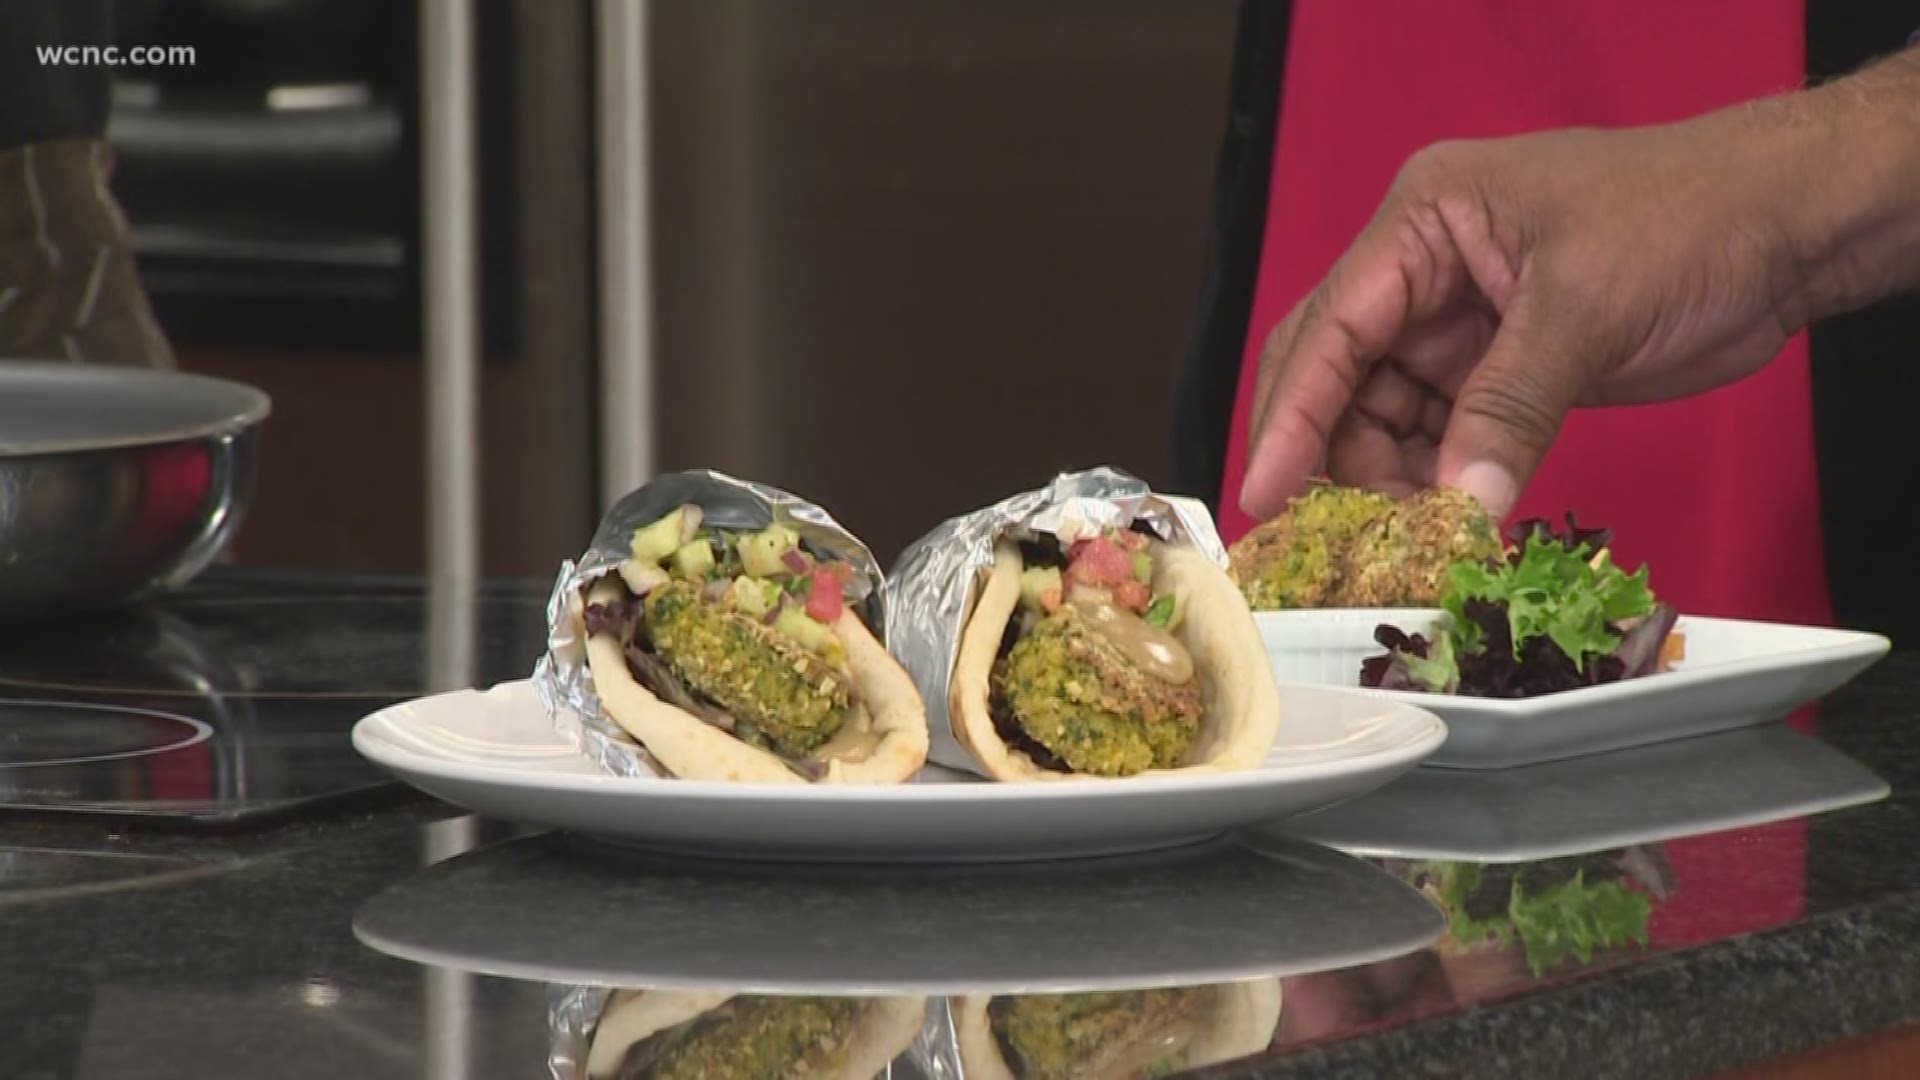 Chef Geoff Bragg shows us how to make a protein packed, vegetarian classic that goes with almost everything: Falafel.